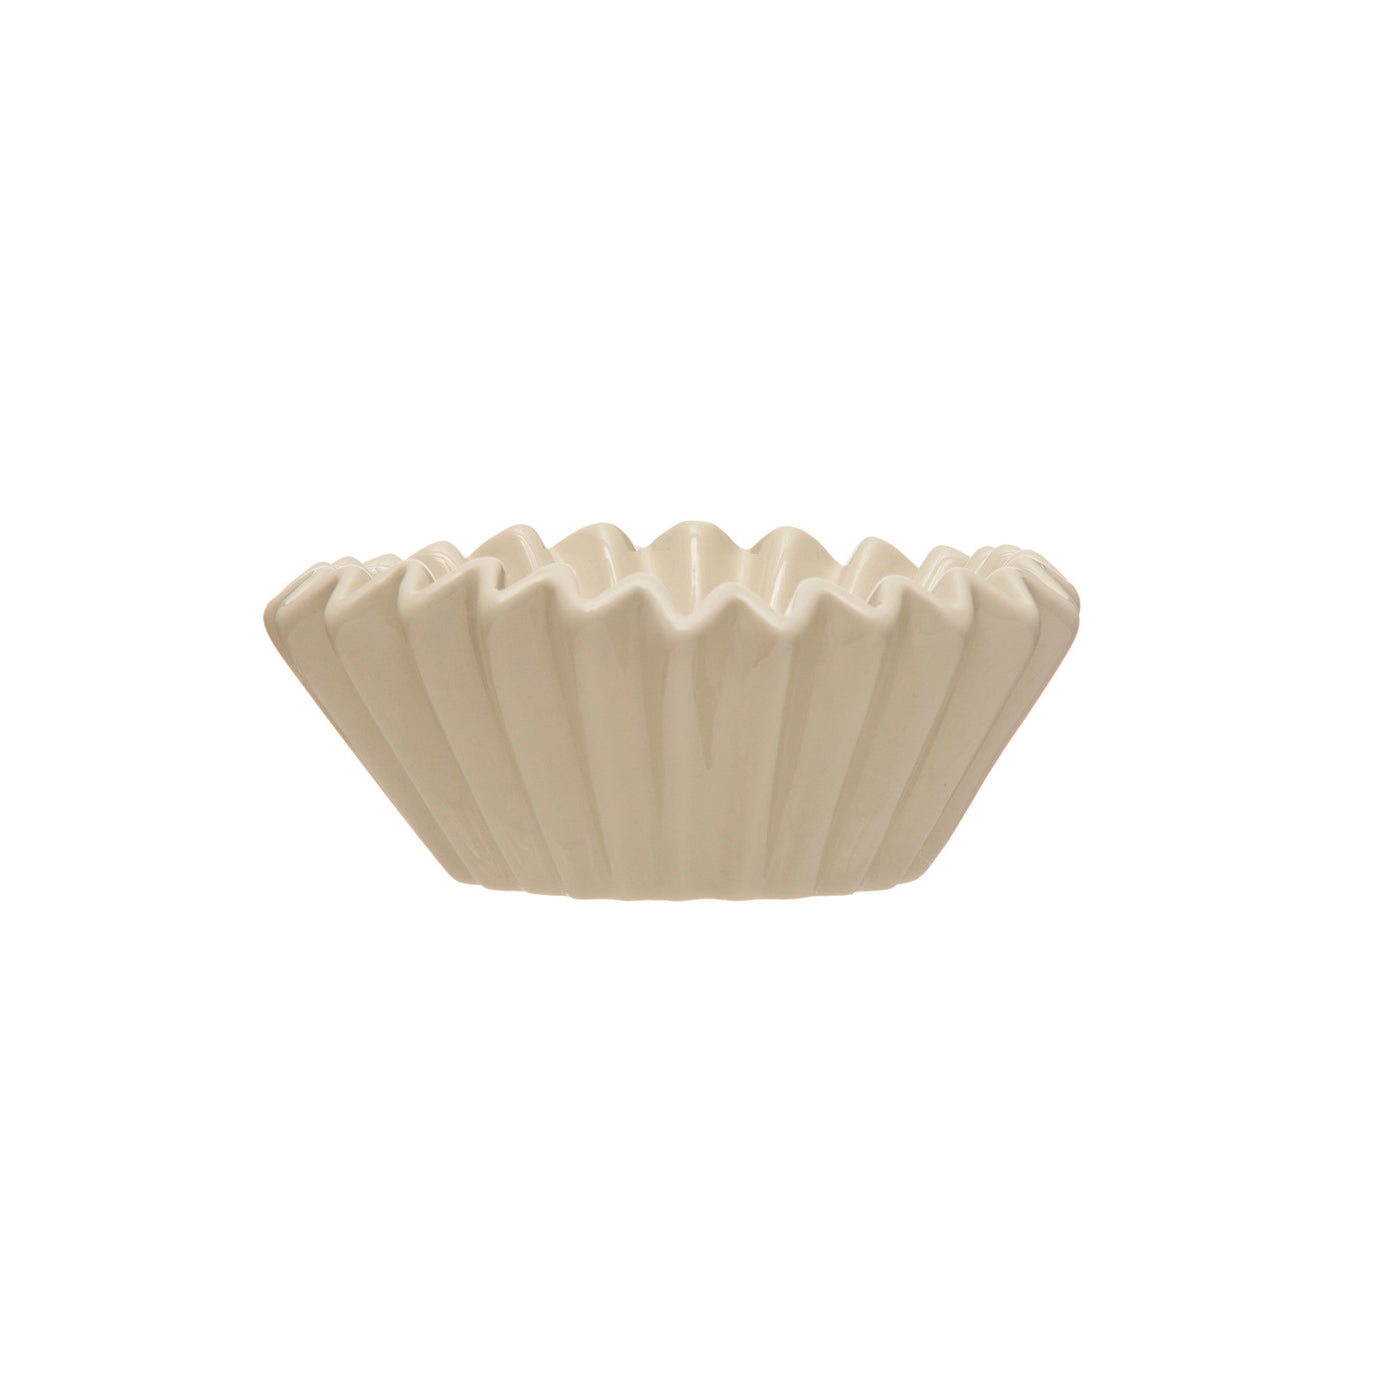 Stoneware Fluted Bowl in White, 6.5"